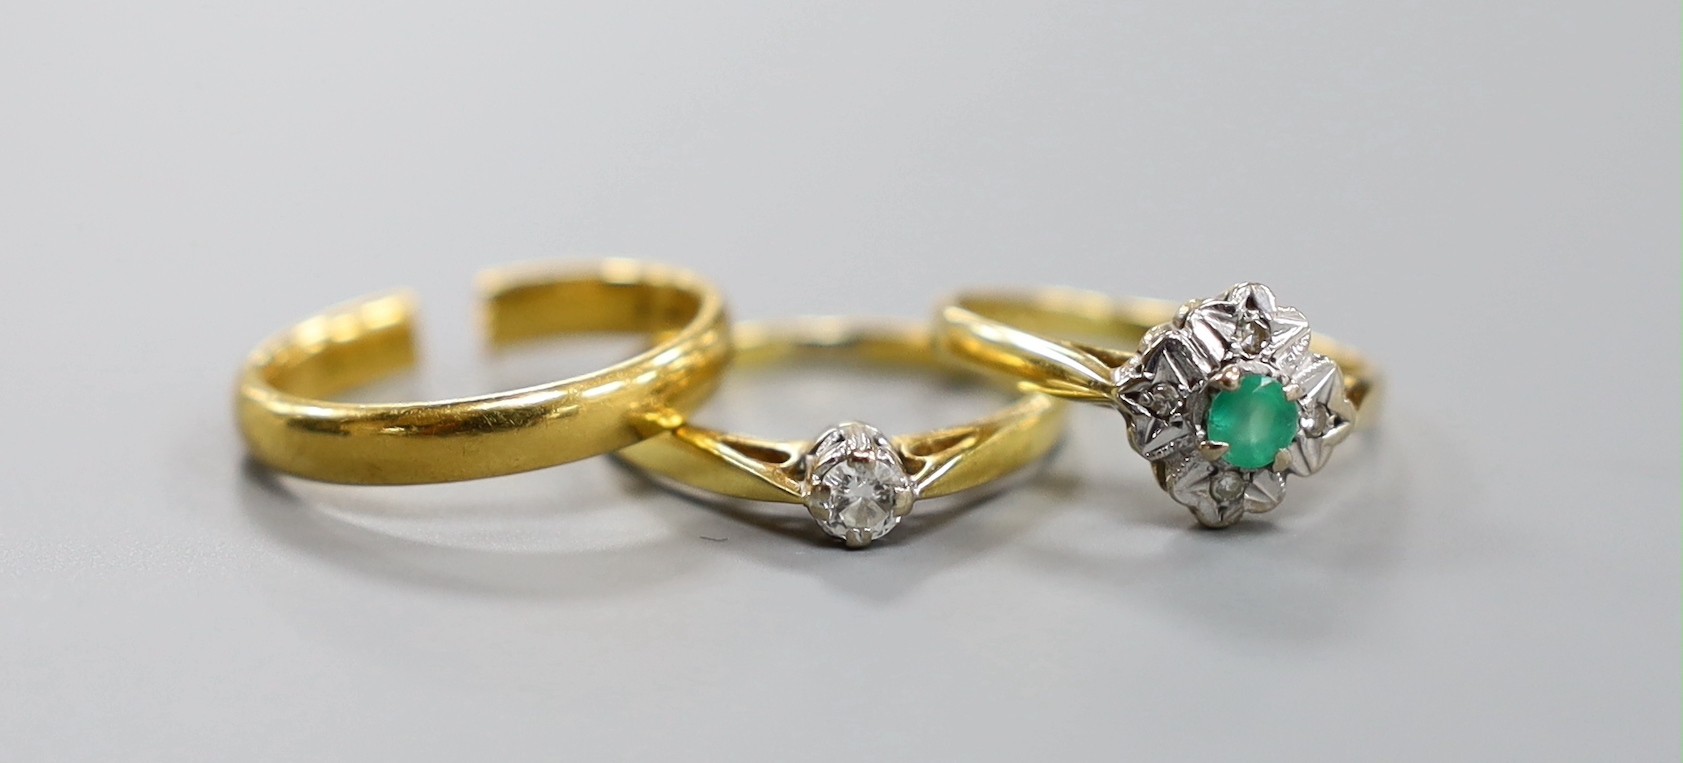 A 22ct yellow gold wedding band (cut), 3.5 grams together with two 18ct gold rings, emerald and illusion set diamond and diamond solitaire, gross 4.6 grams.